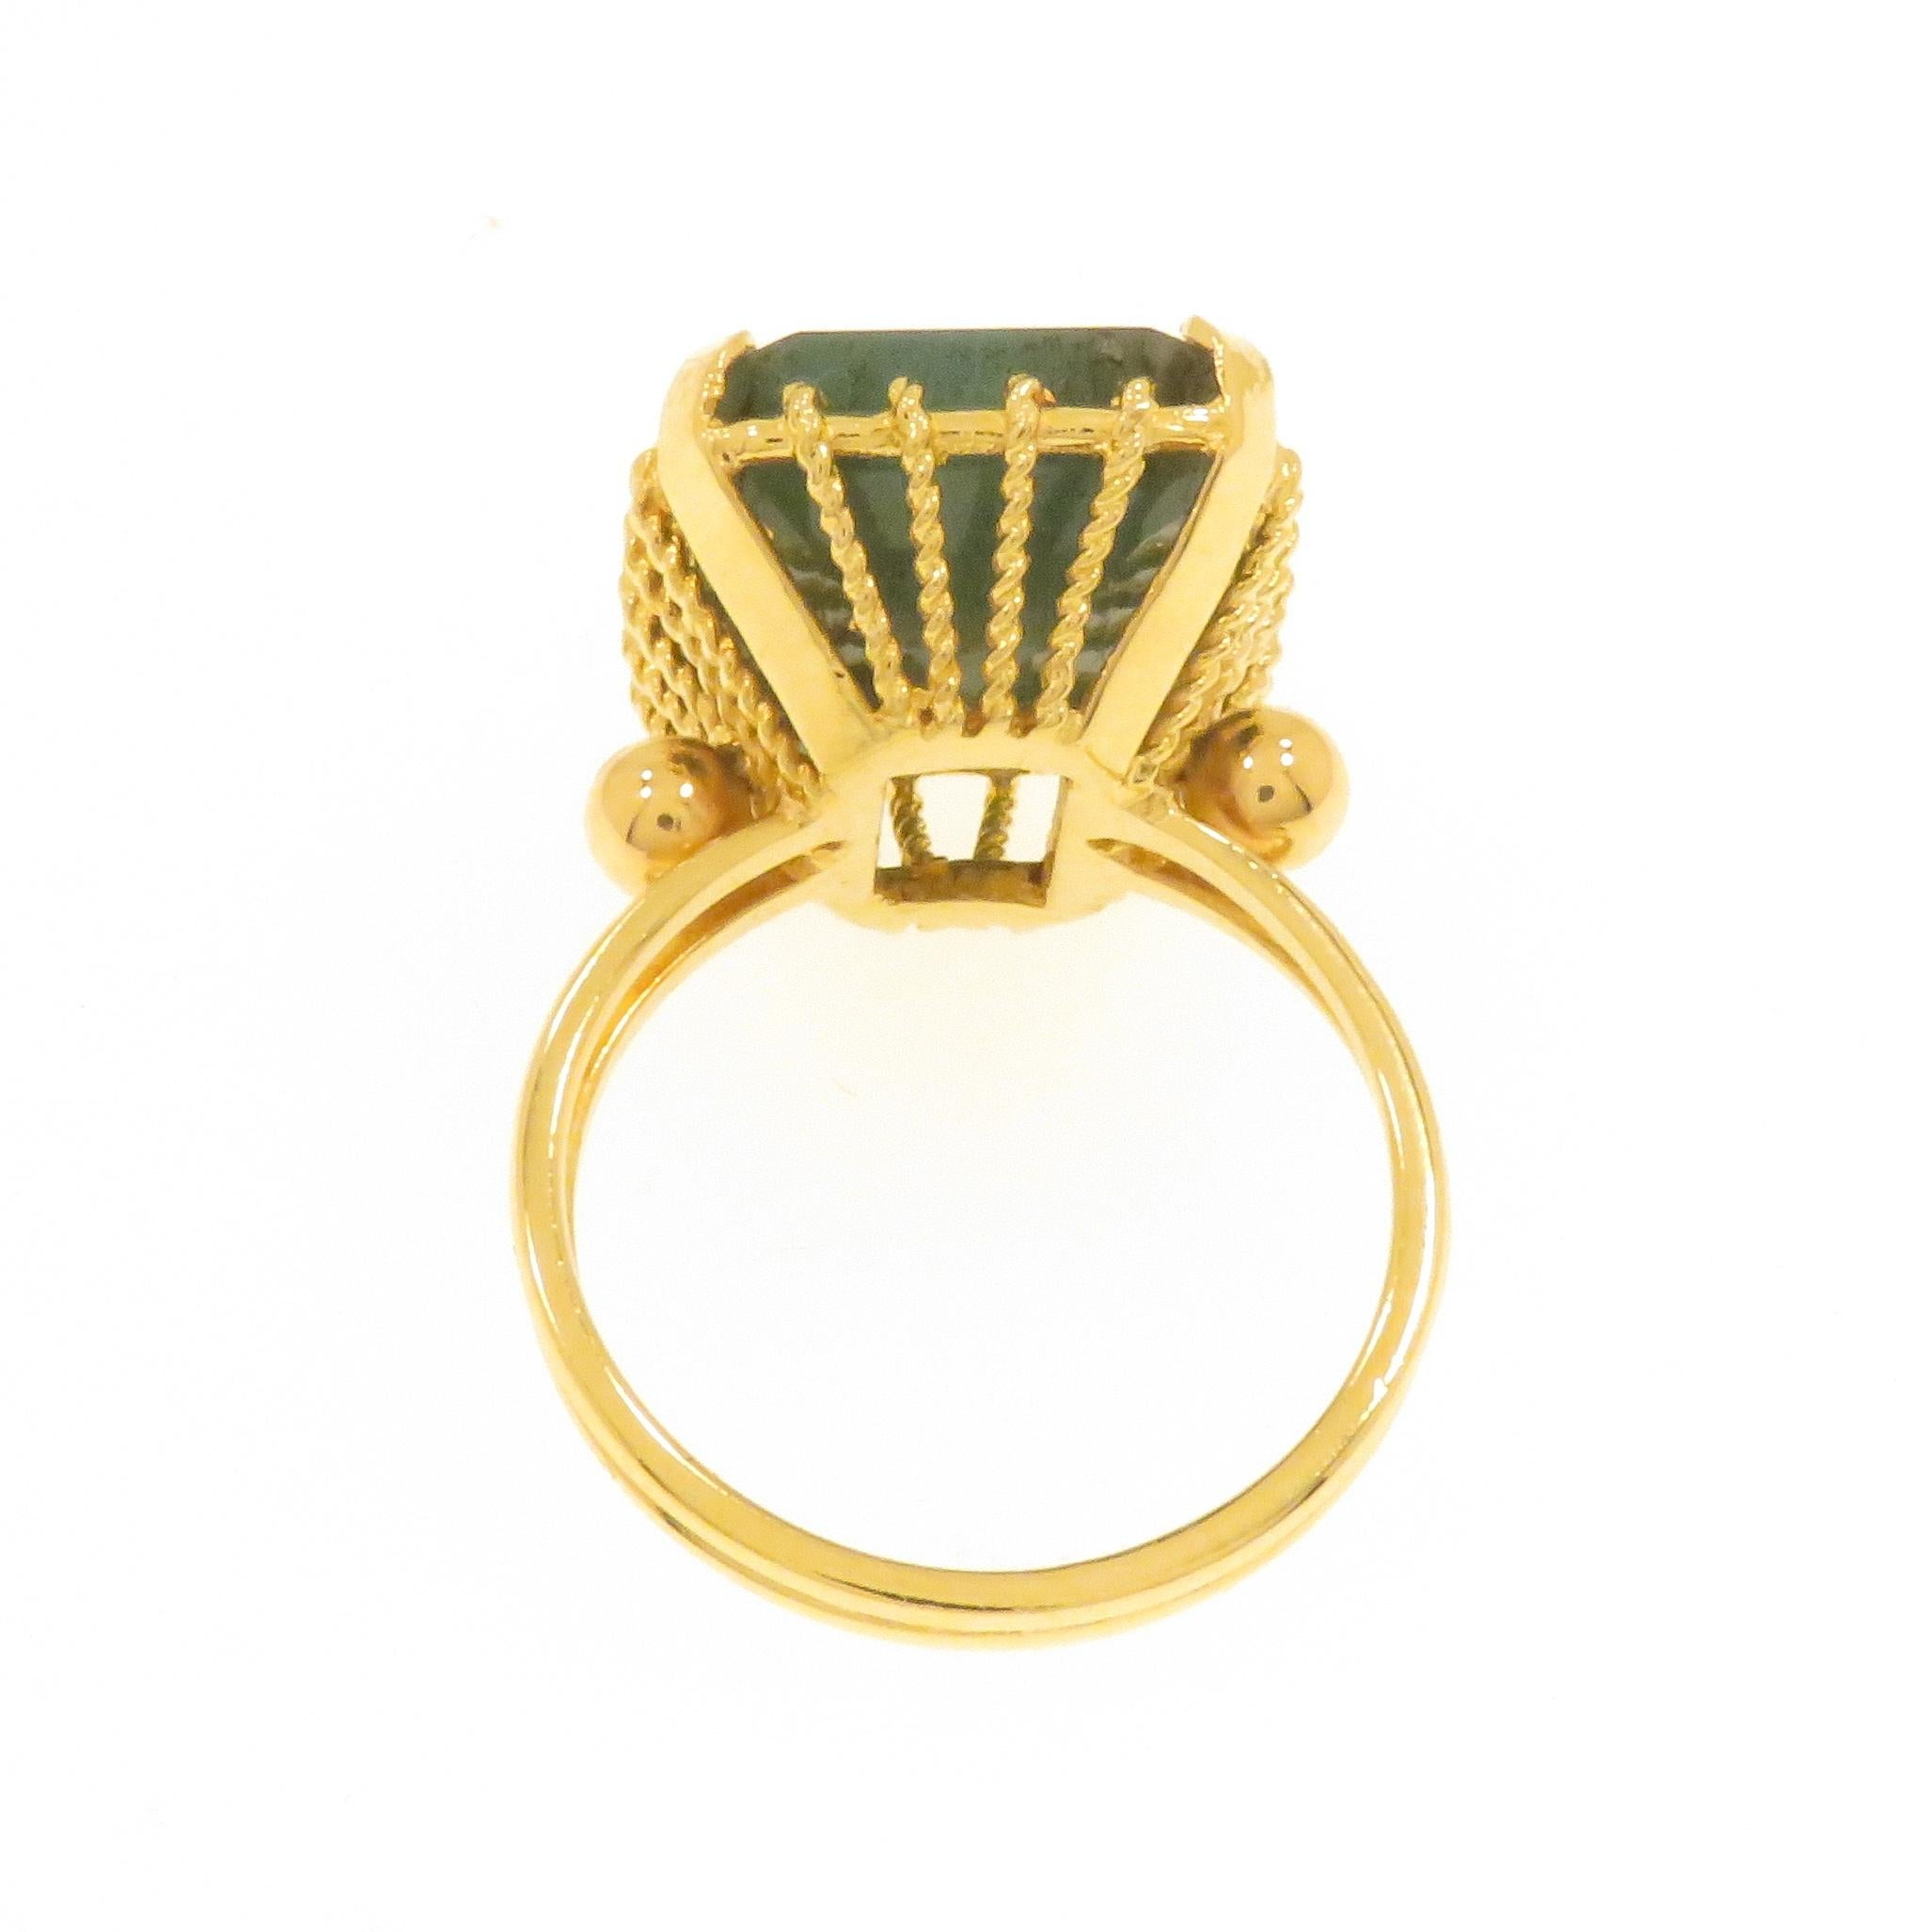 Green Emerald 18 Karat Yellow Gold Vintage Cocktail Ring Handcrafted in Italy For Sale 4